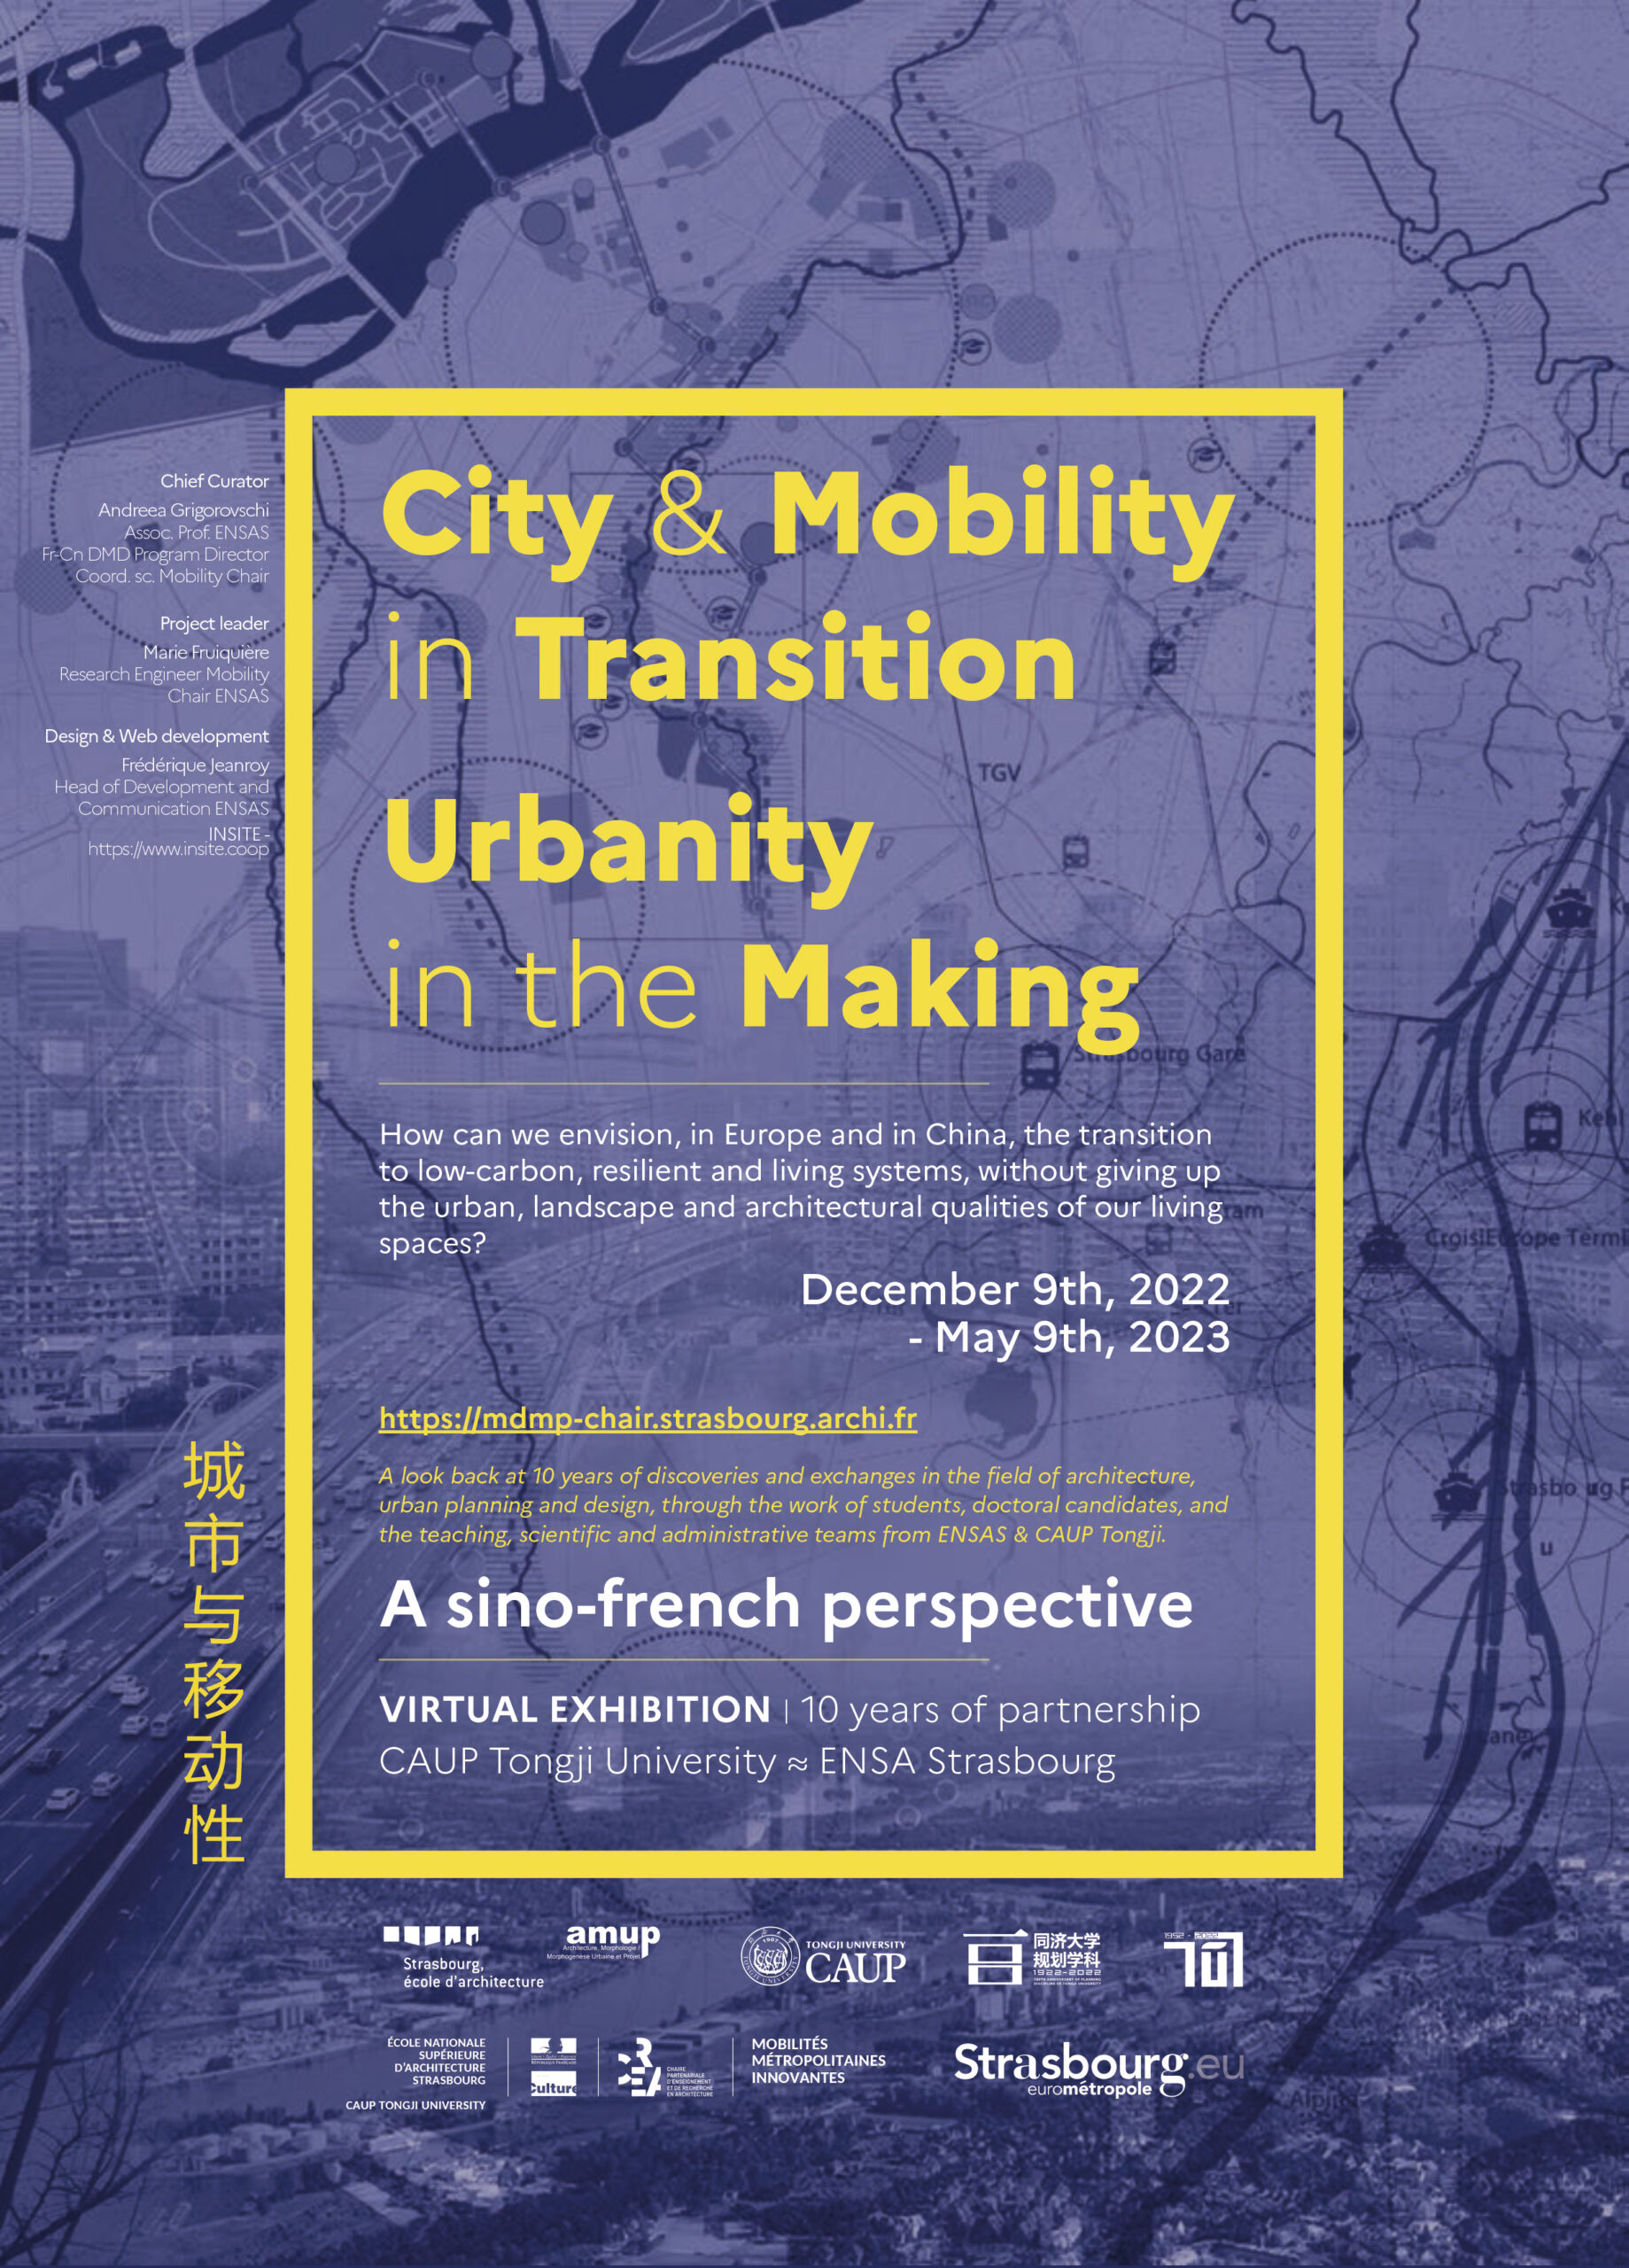 Exposition virtuelle : City & mobility in transition. Urbanity in the making. A sino-french perspective.